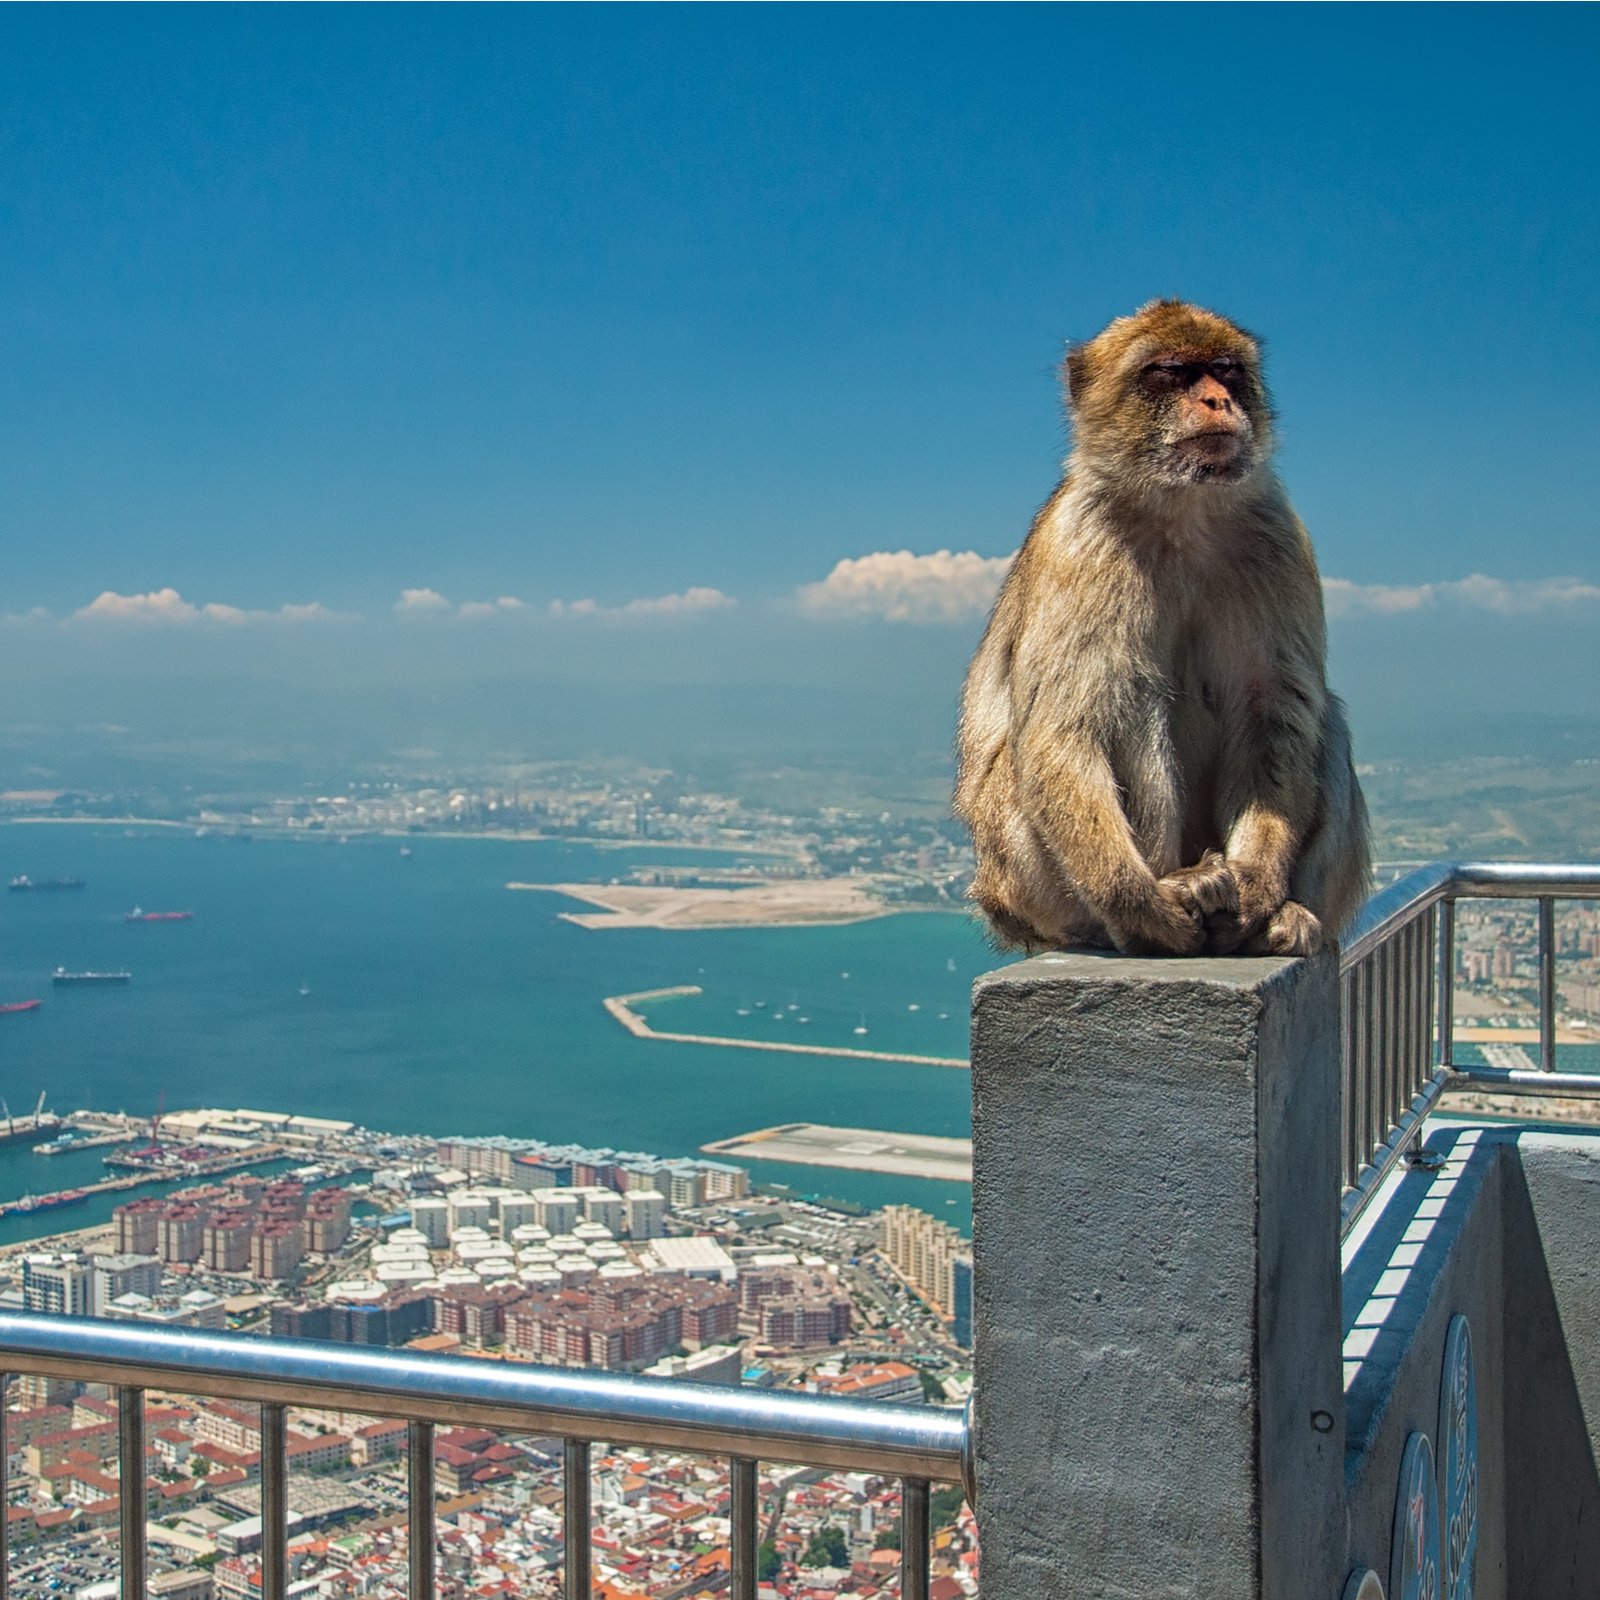 Gibraltar Paves Way for Regulation of Crypto and DLT Companies